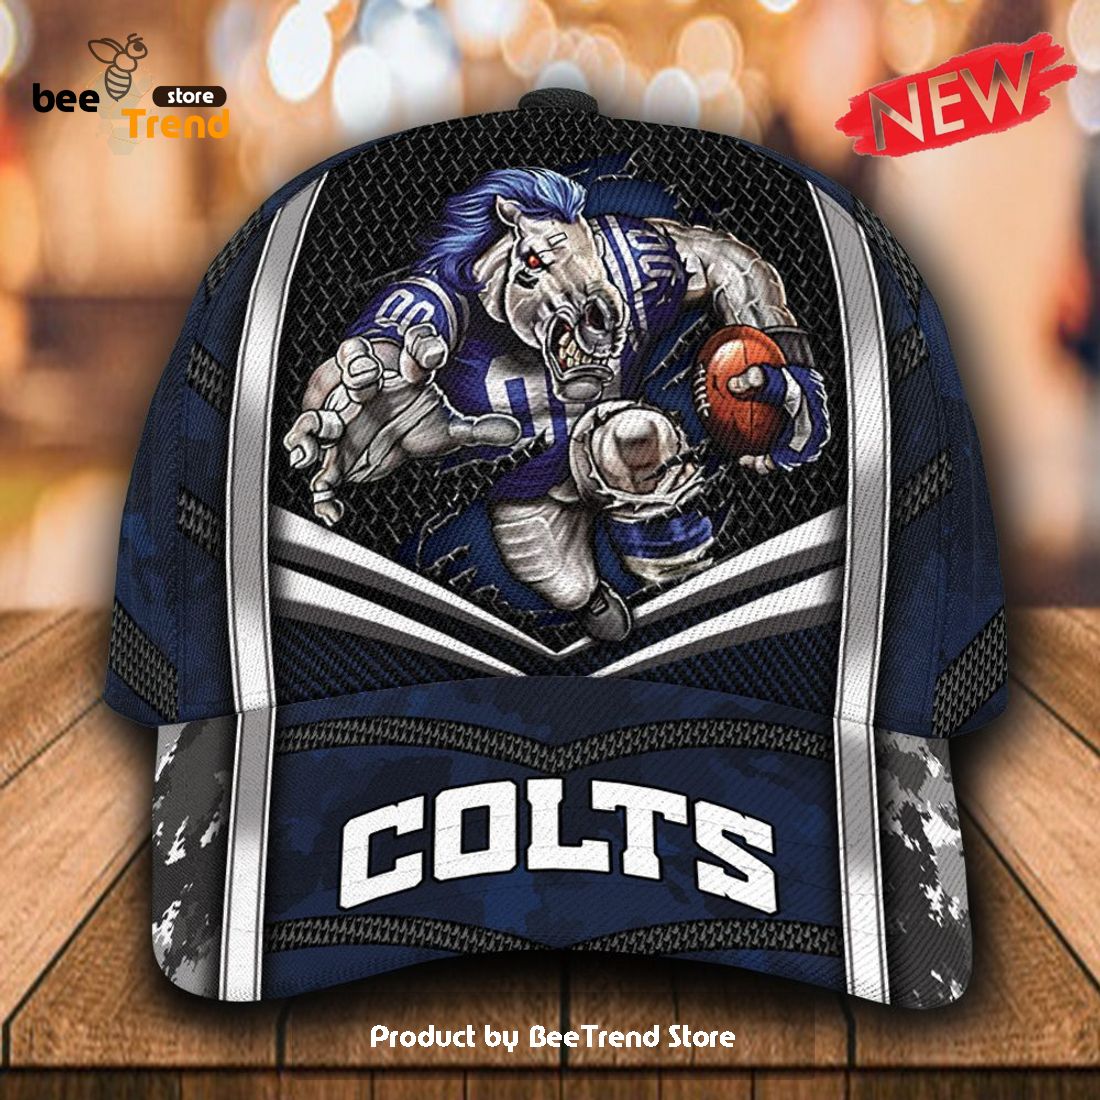 Indianapolis Colts Custom Number And Name NFL 3D Baseball Jersey